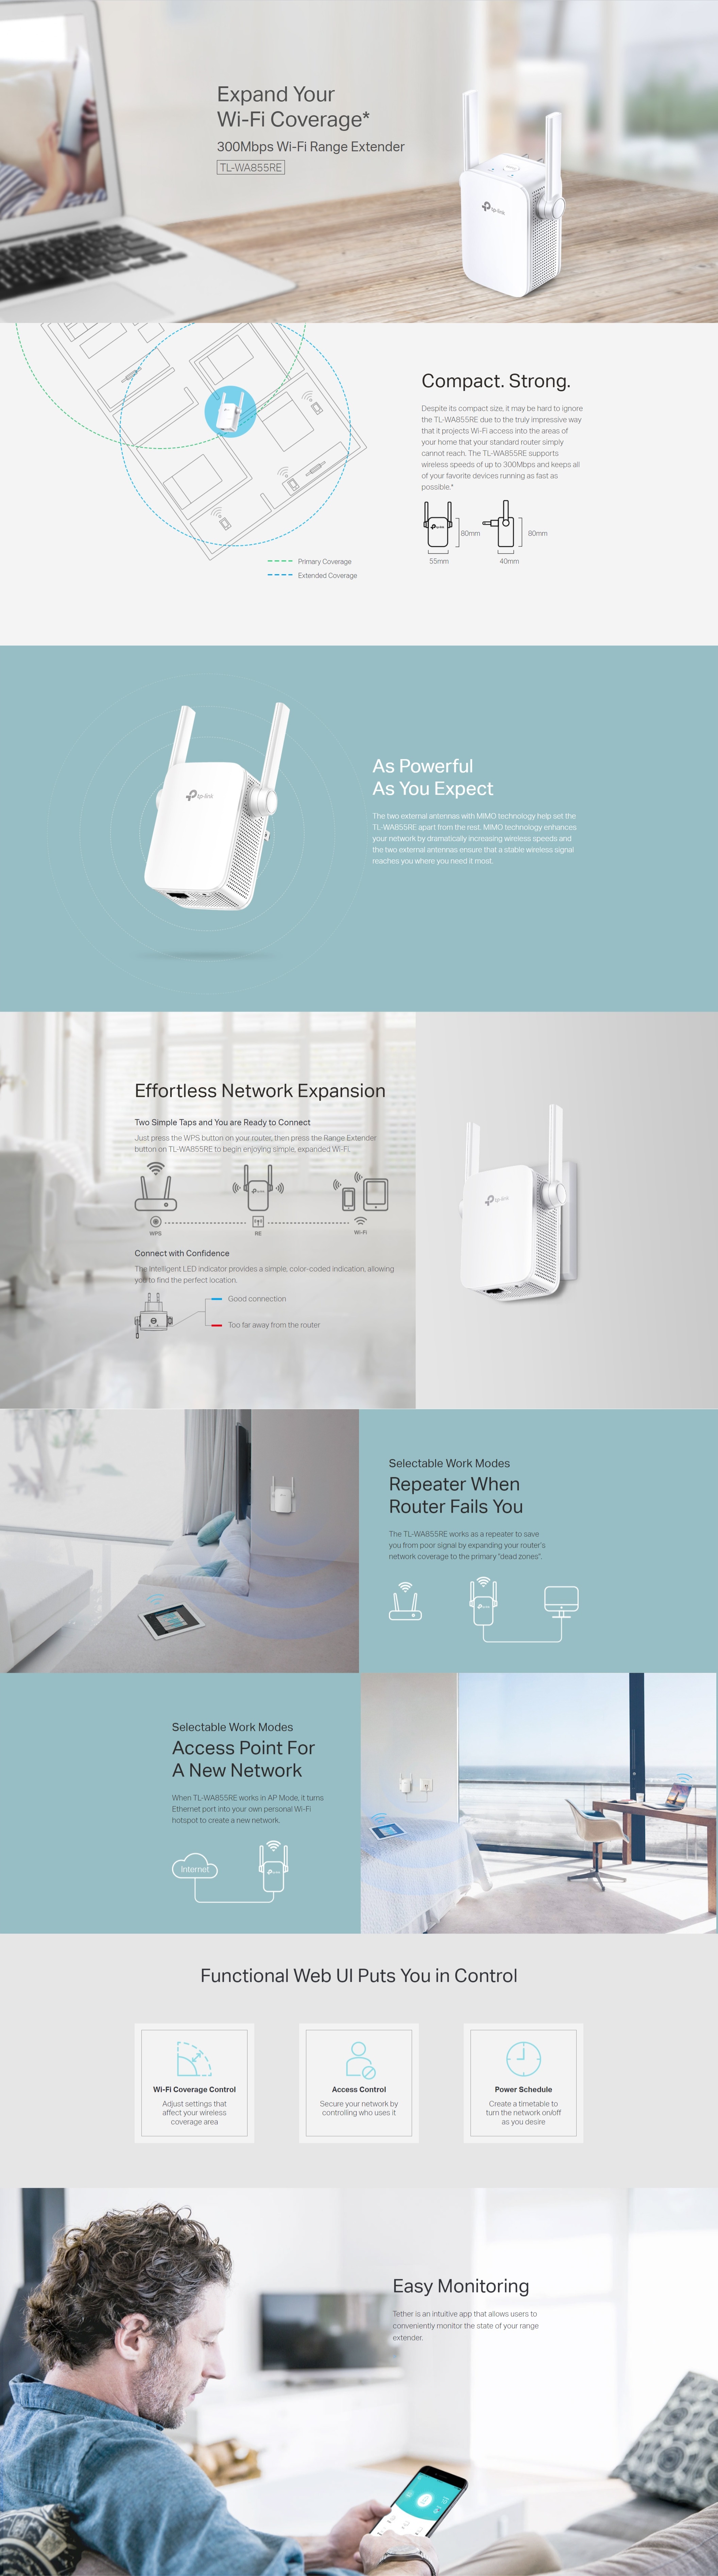 A large marketing image providing additional information about the product TP-Link WA855RE - N300 Wi-Fi 4 Range Extender - Additional alt info not provided